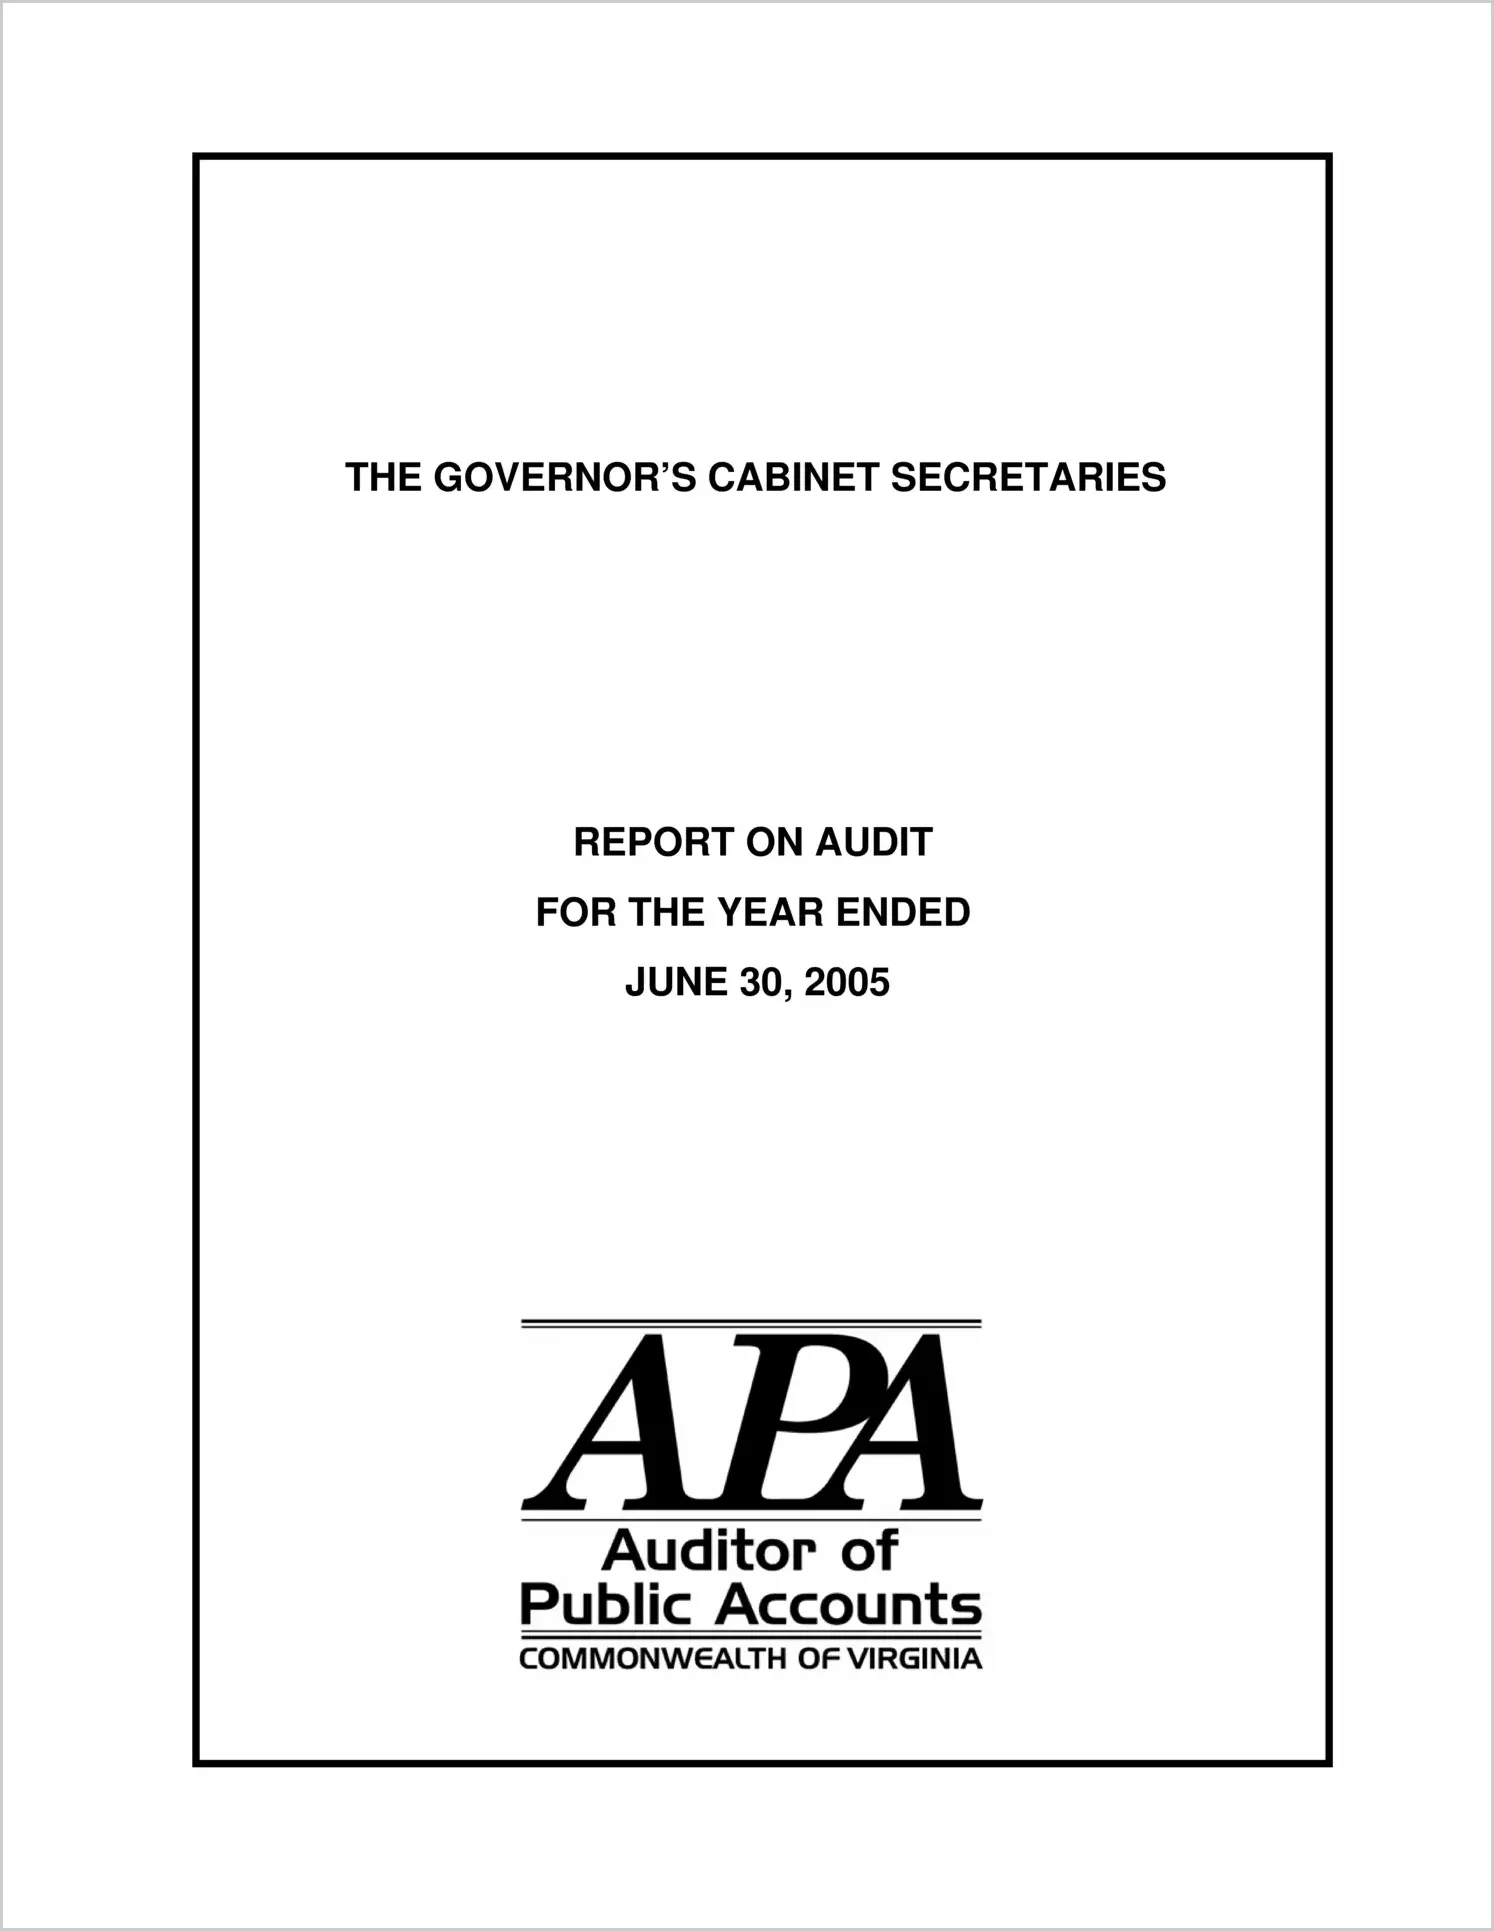 Governor? Cabinet Secretaries for the year ended June 30, 2005